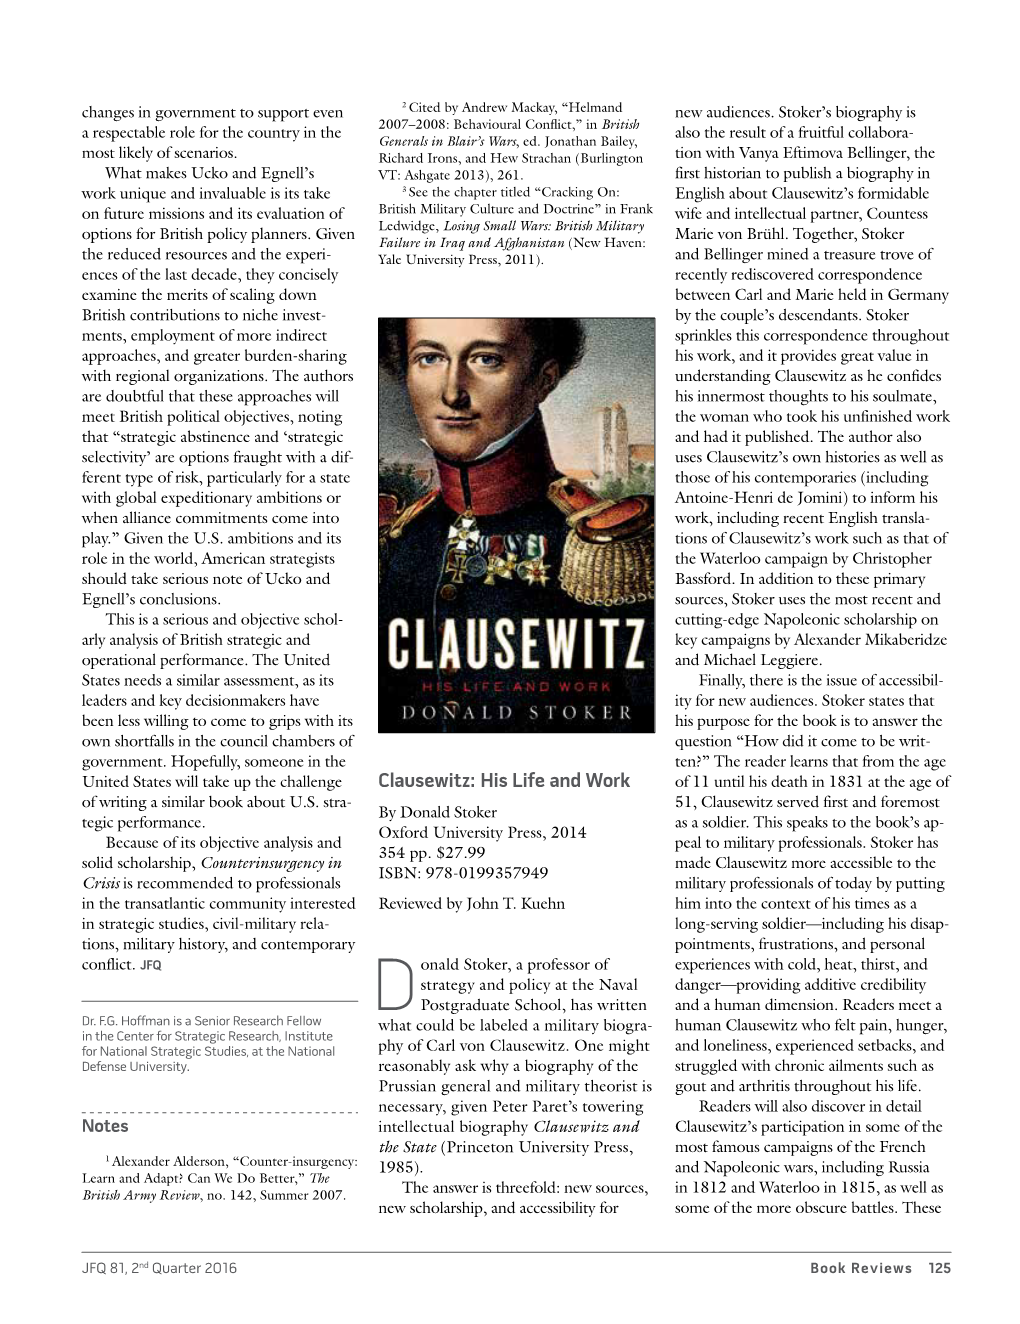 Clausewitz: His Life and Work of 11 Until His Death in 1831 at the Age of of Writing a Similar Book About U.S